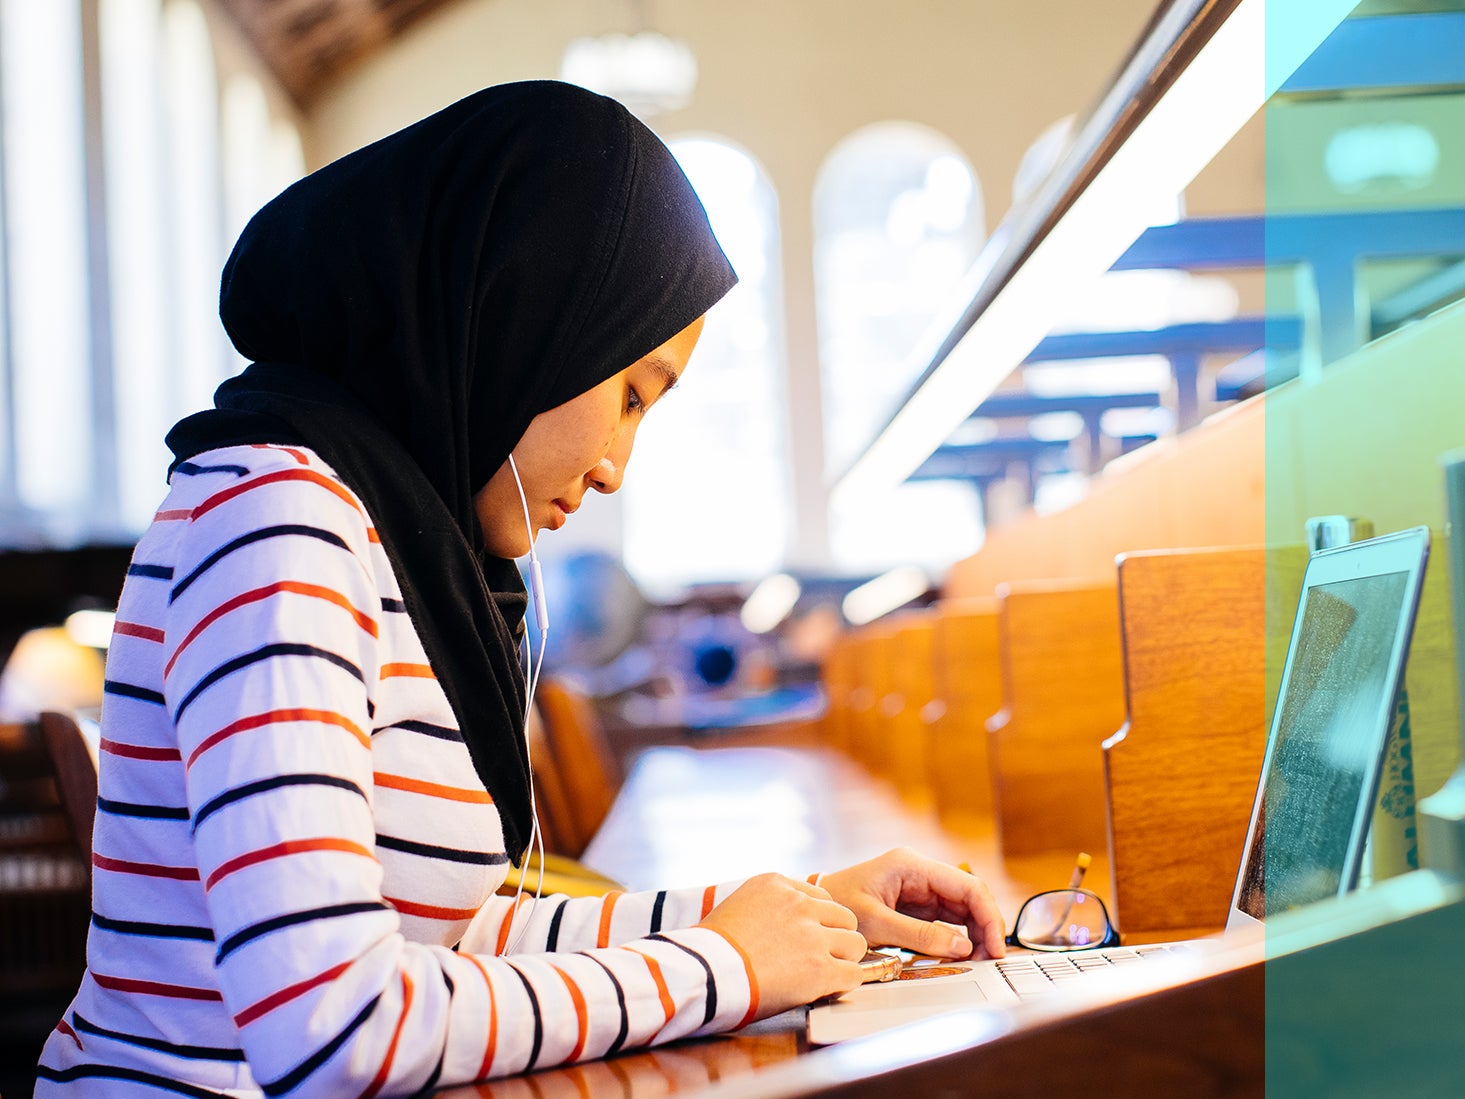 A woman wearing a headscarf does research on a computer in the library.